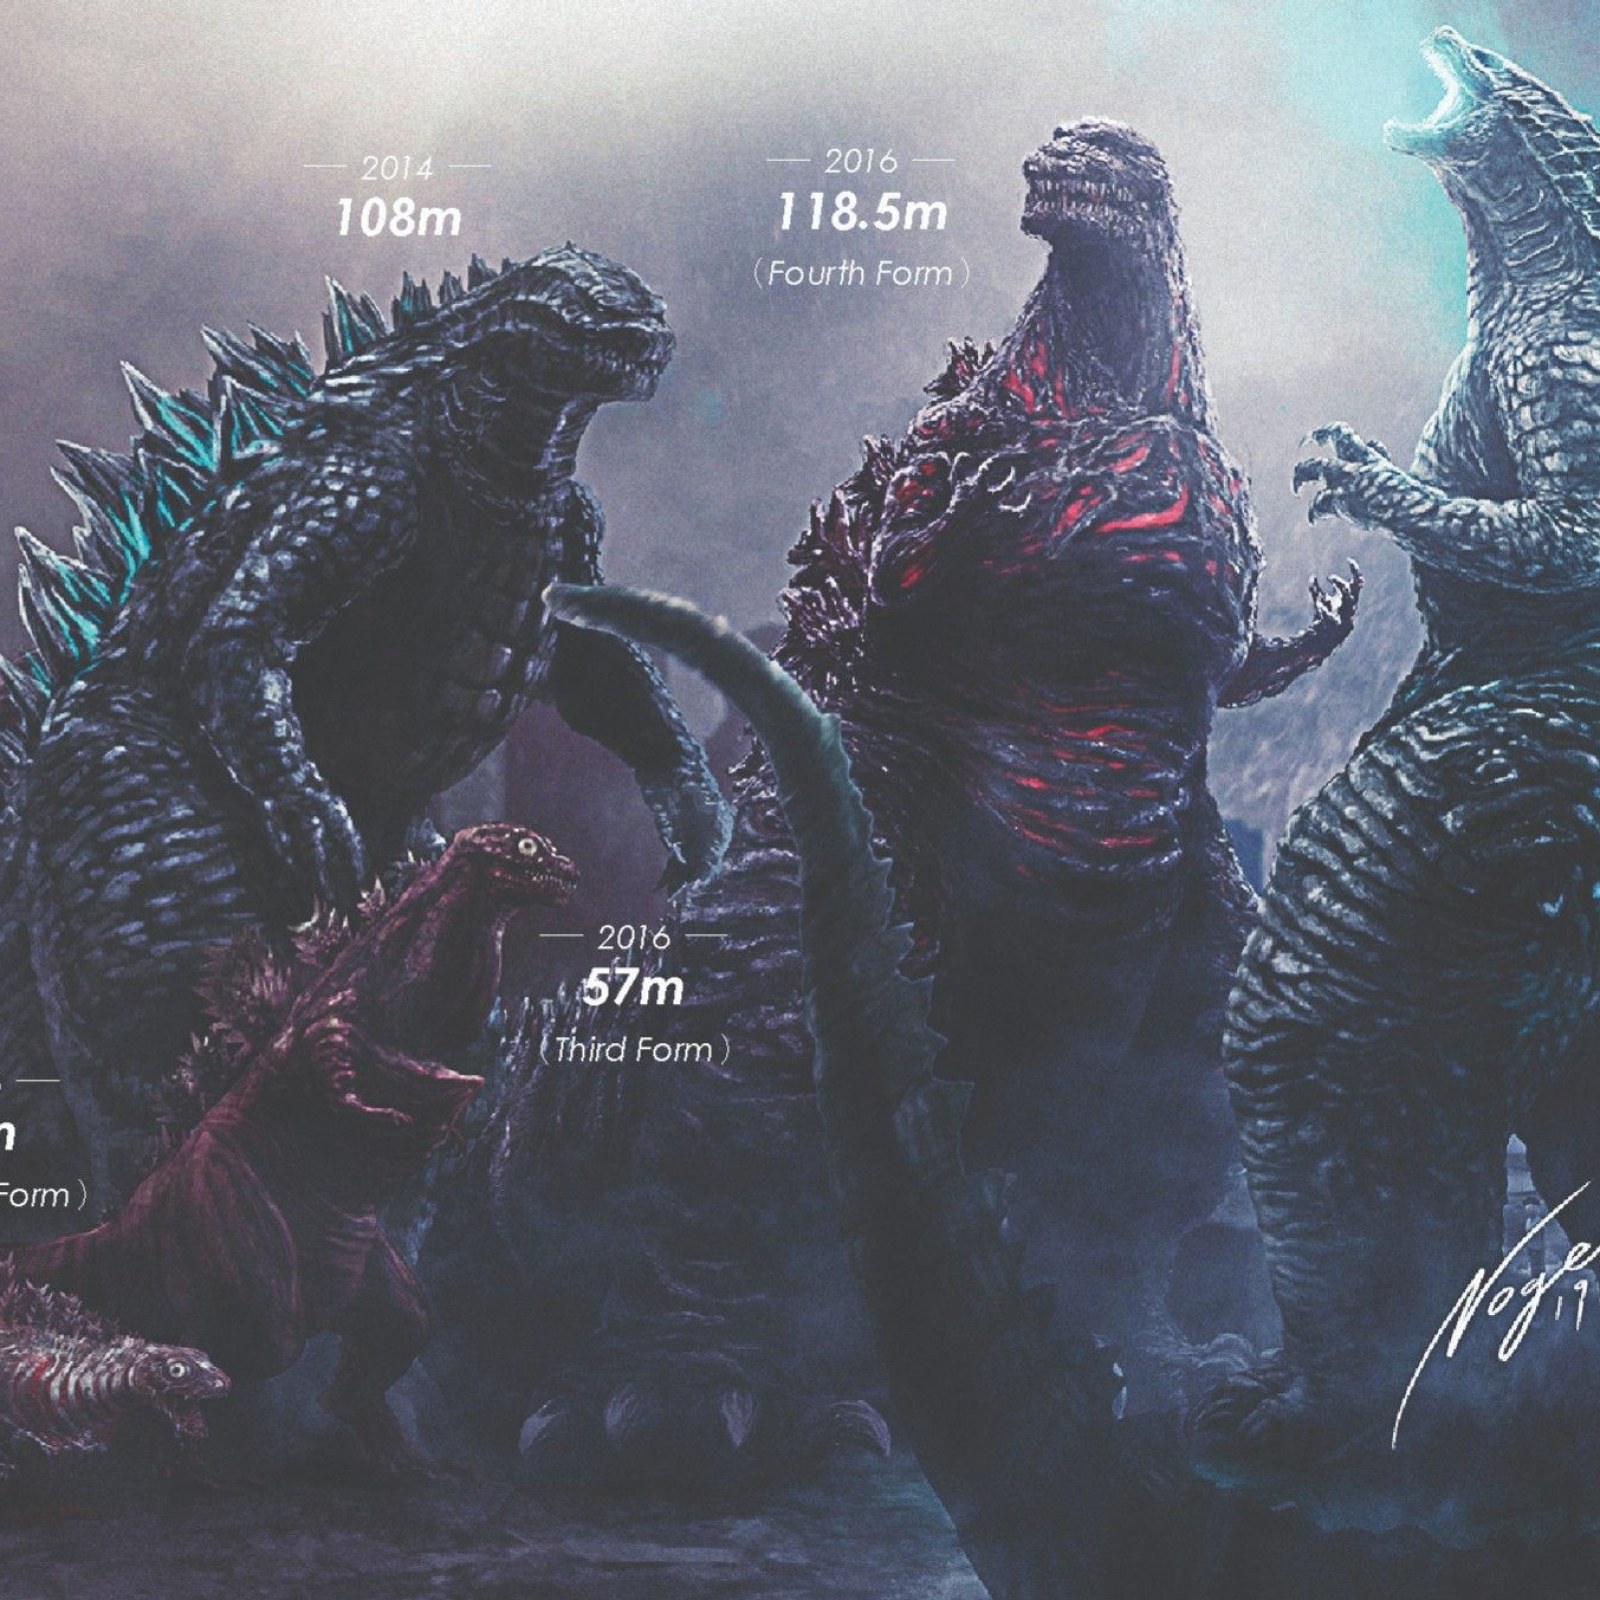 Godzilla Size Chart Shows How Much The King Of Monsters Has Grown Over The Years